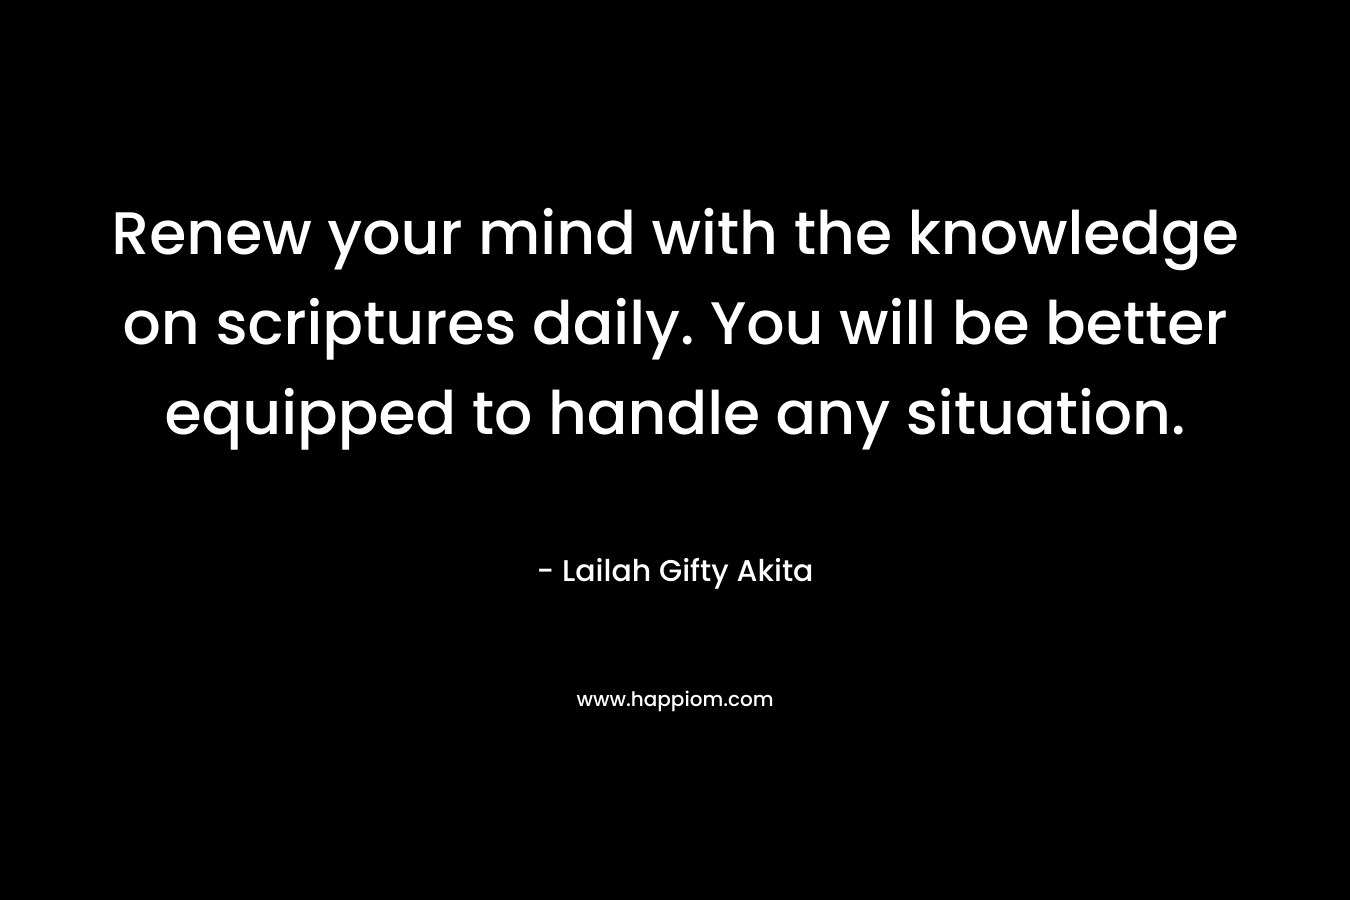 Renew your mind with the knowledge on scriptures daily. You will be better equipped to handle any situation.